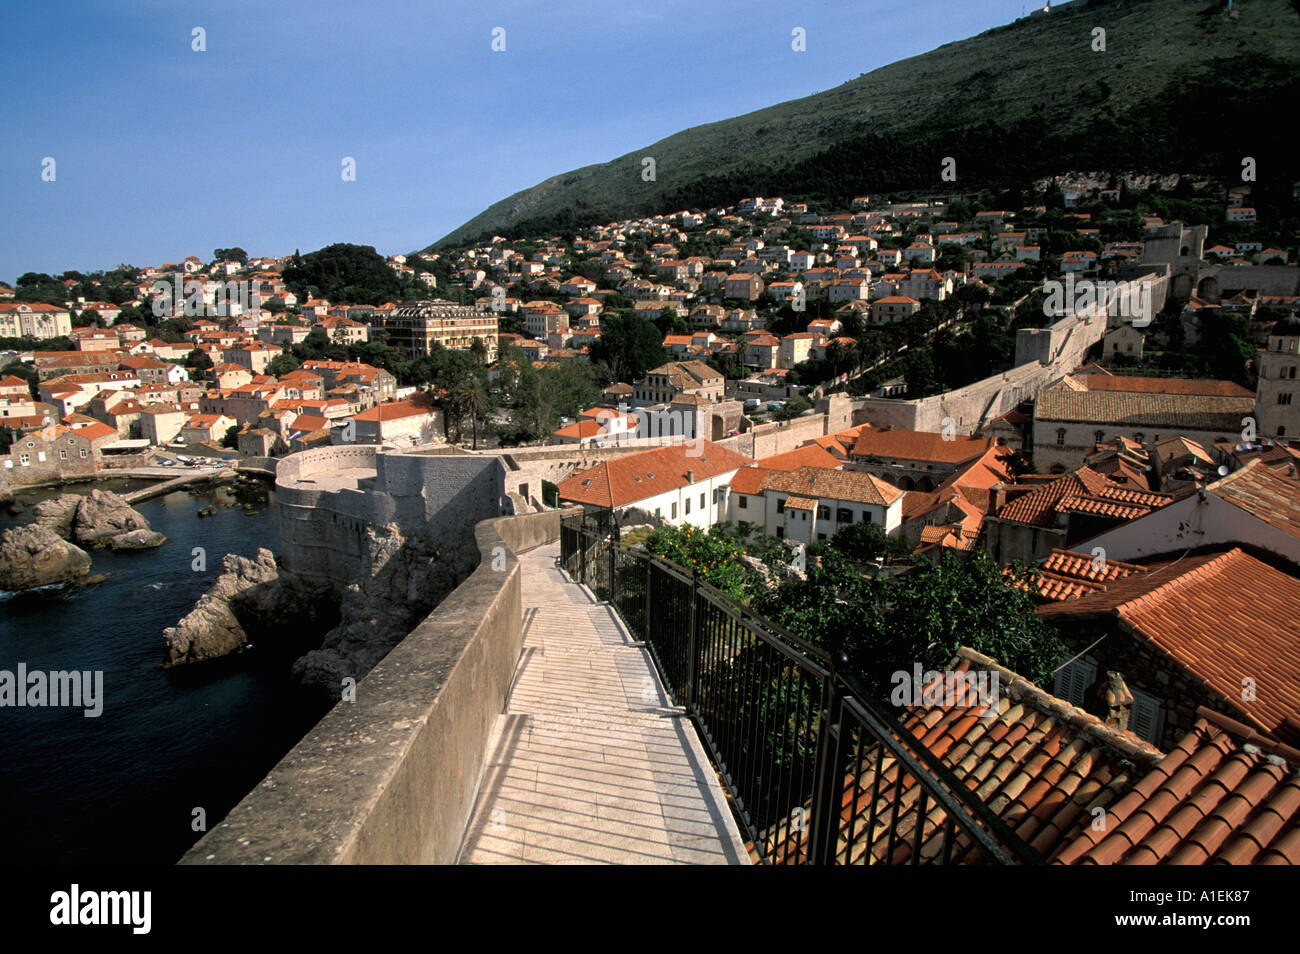 Dubrovnik Croatia Old Town Walled City Stock Photo